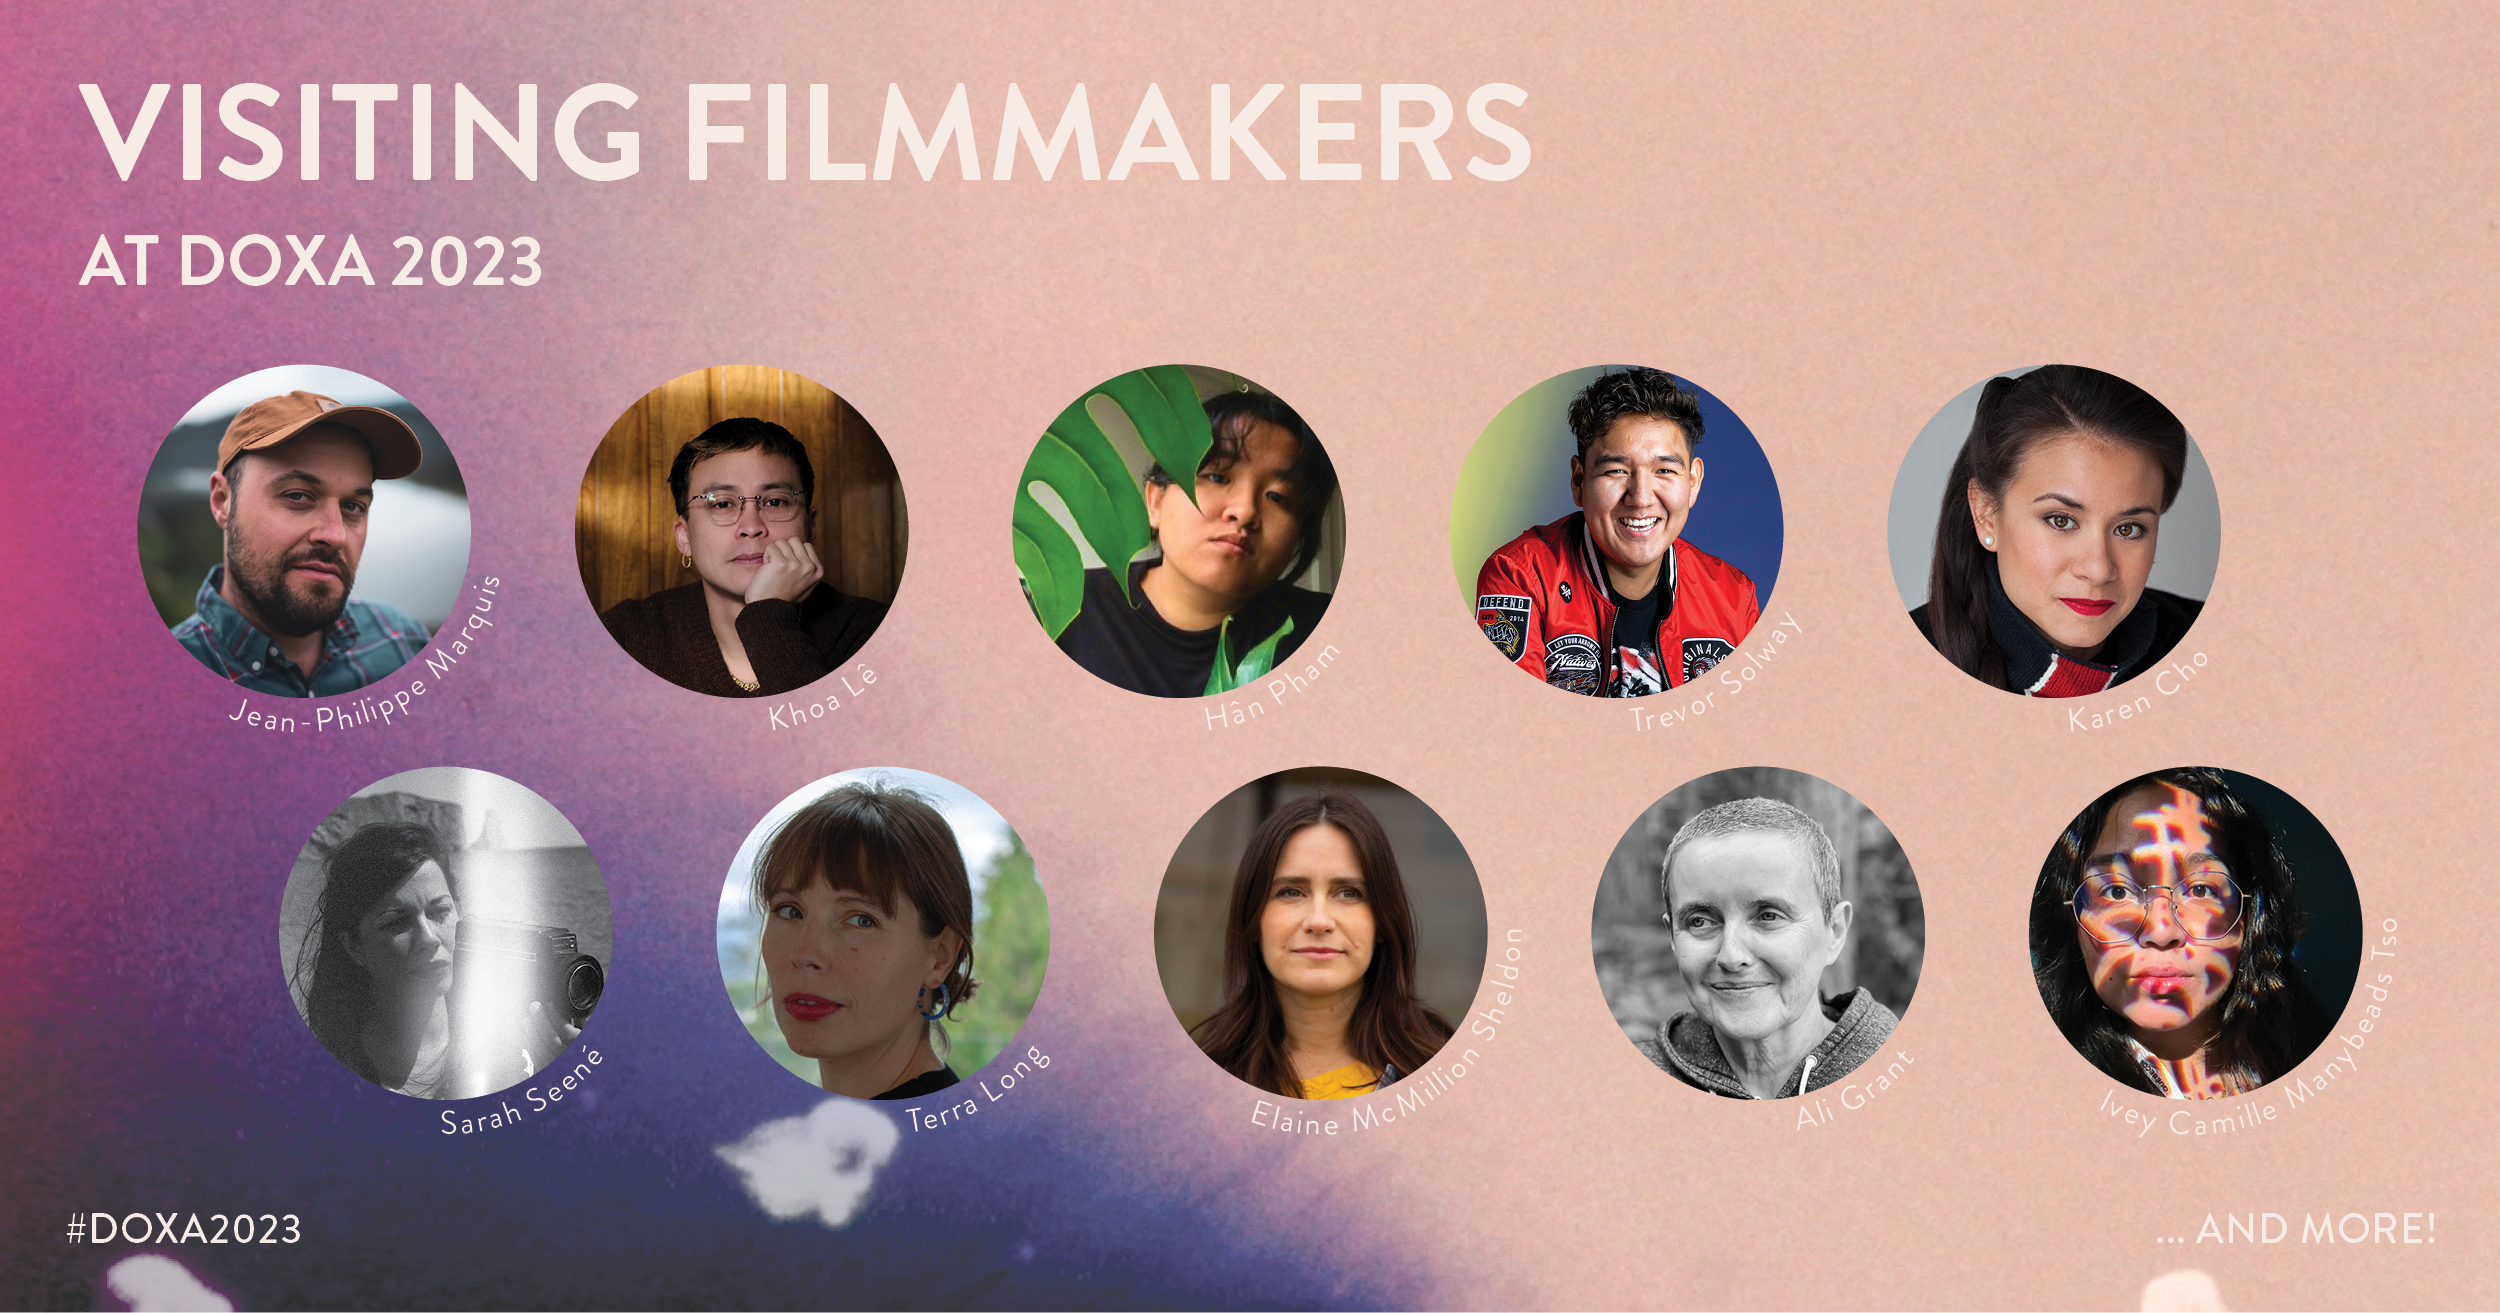 Visiting filmmakers graphic showing 10 portrait circles over an abstract blurry background